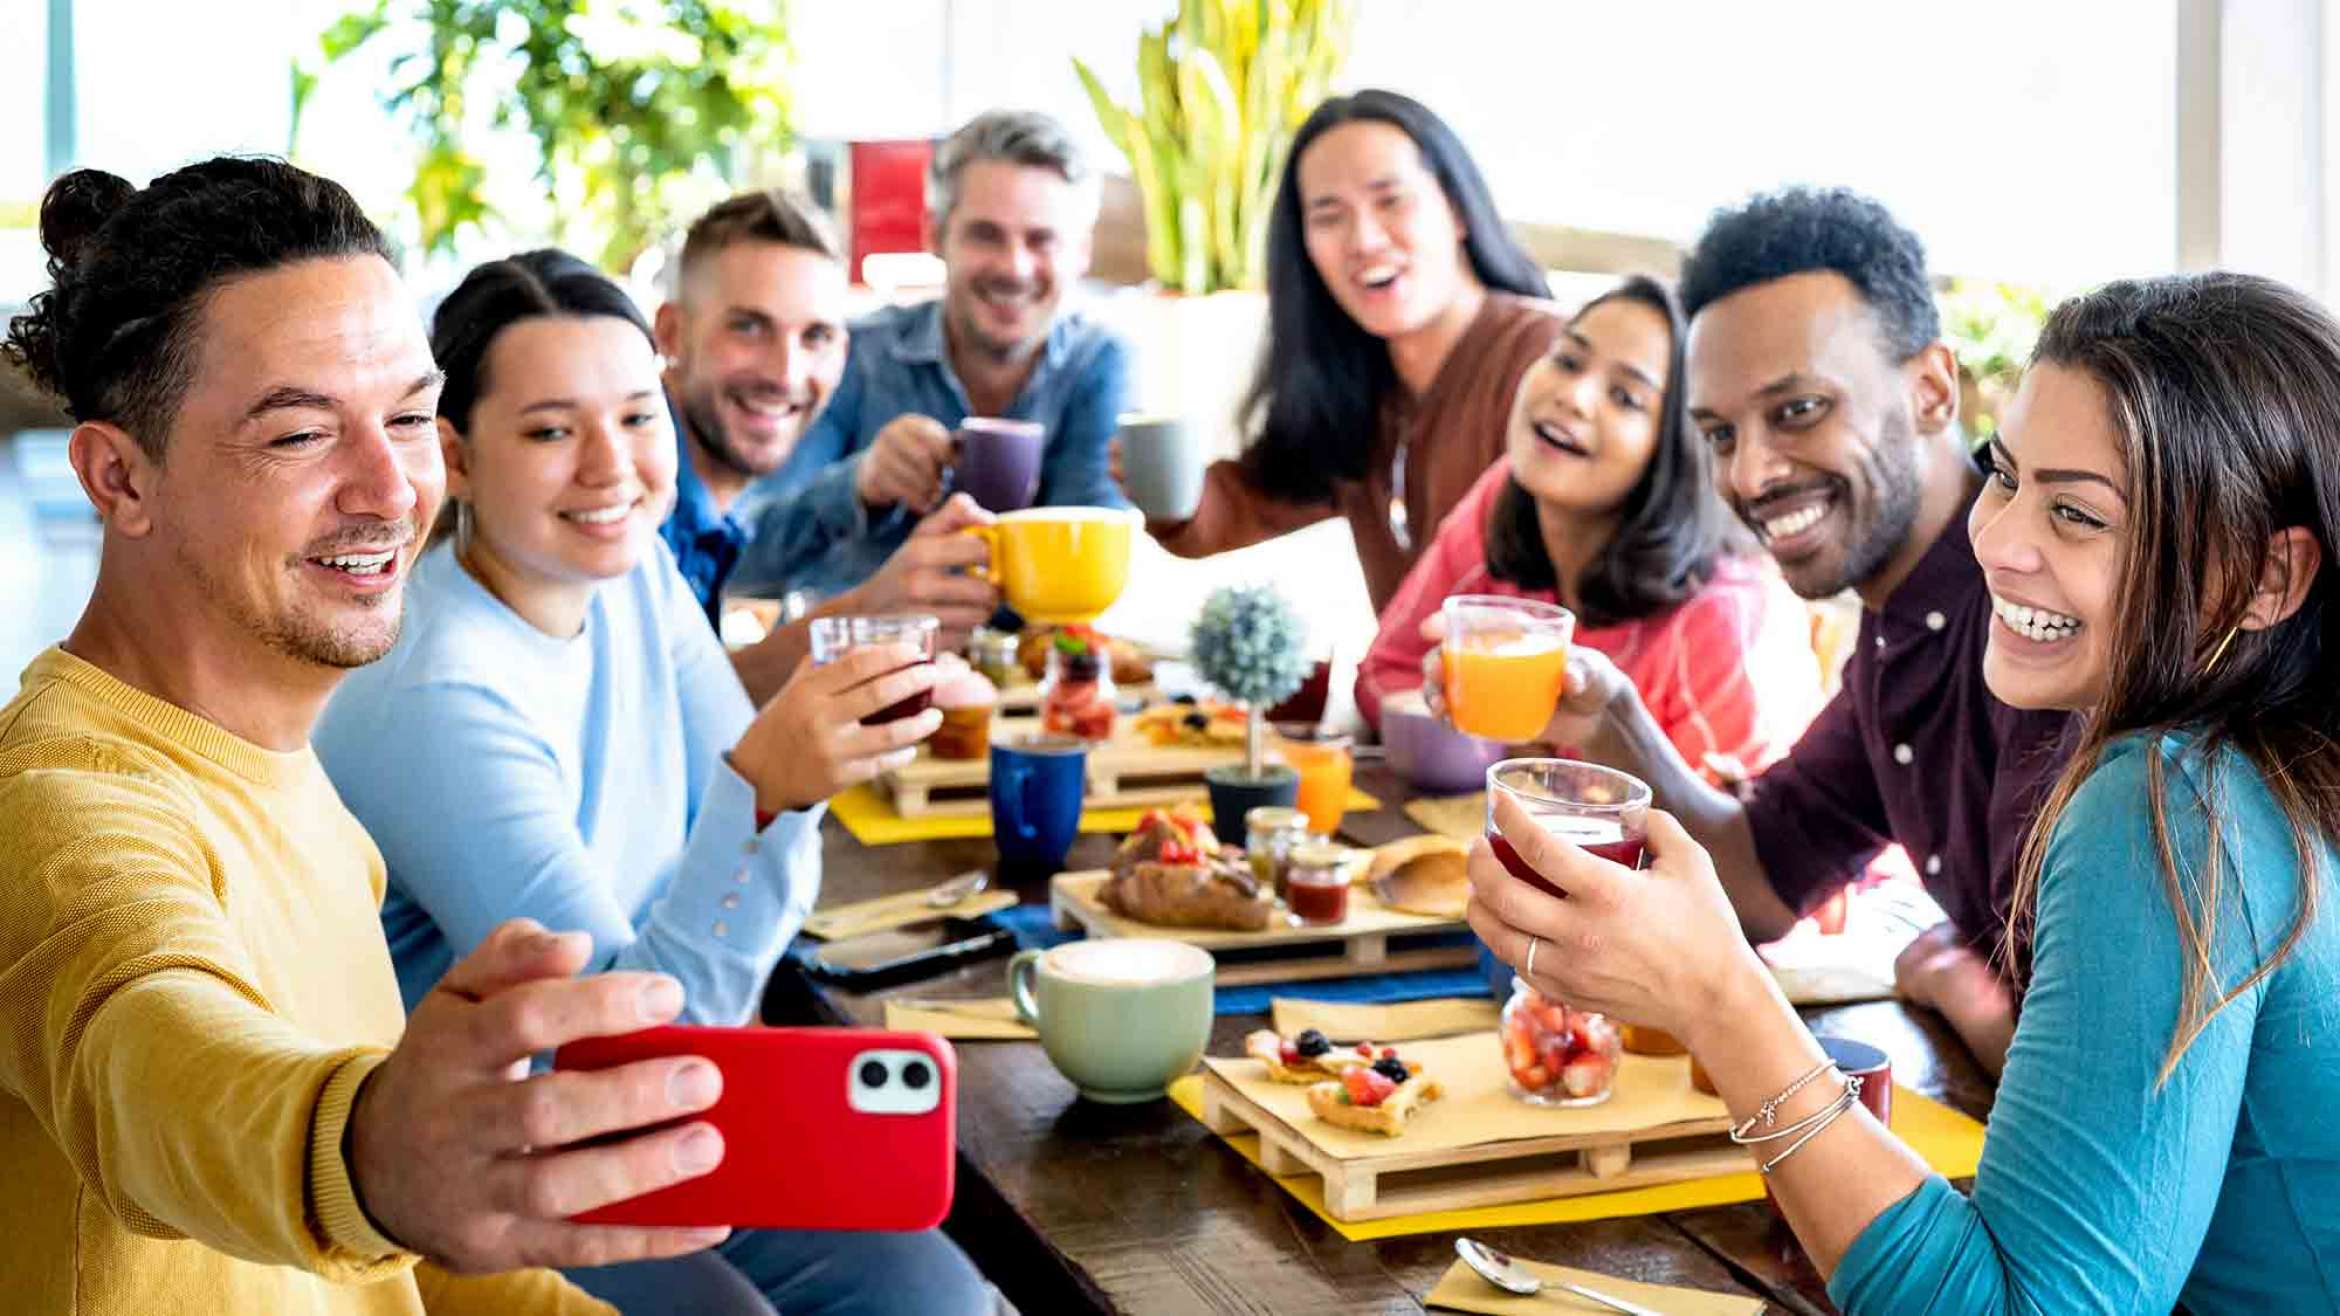 Friends taking selfie on breakfast time drinking juices and eating cakes - People having fun at fashion cafeteria - Life style concept with happy men and women at cafe bar equal eats